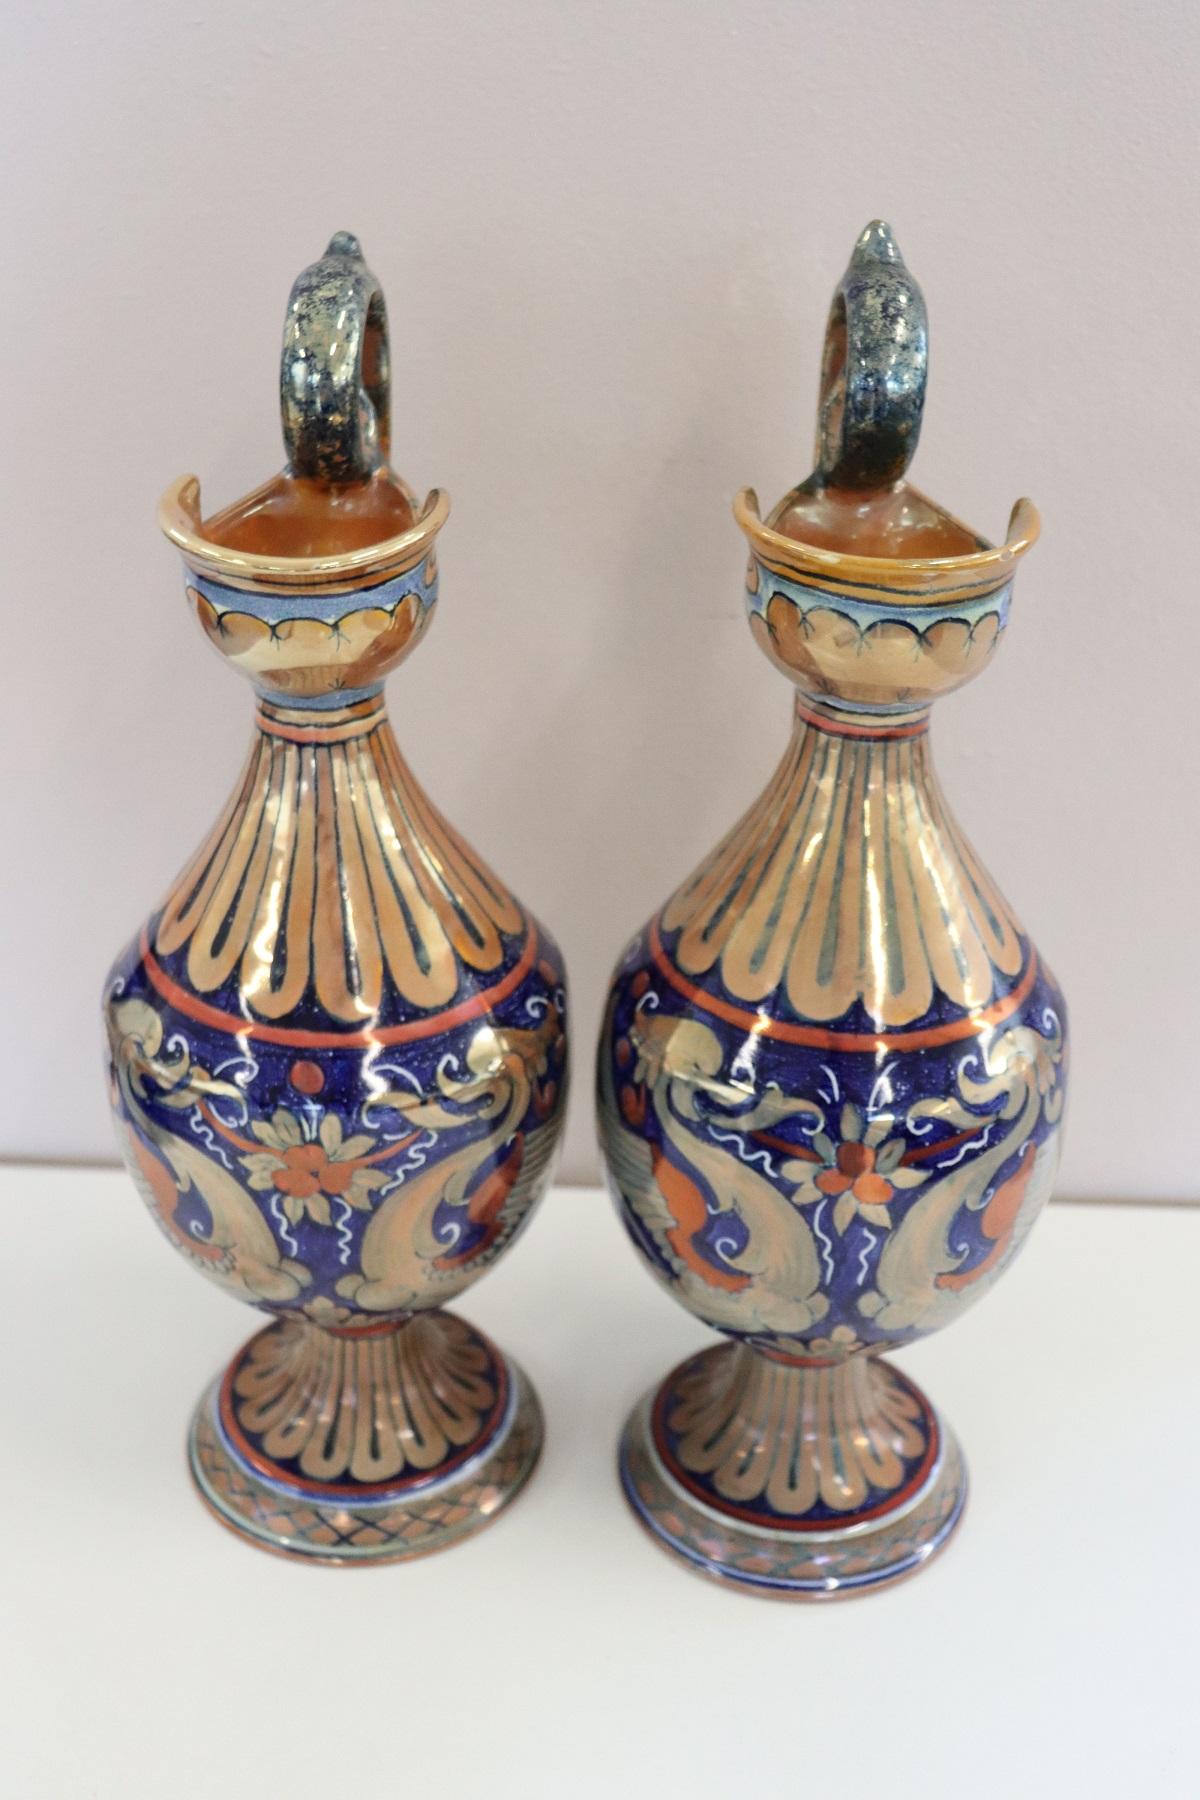 Pair of Majolica Vases with Blue Decorations by Gualdo Tadino, 1920s 2